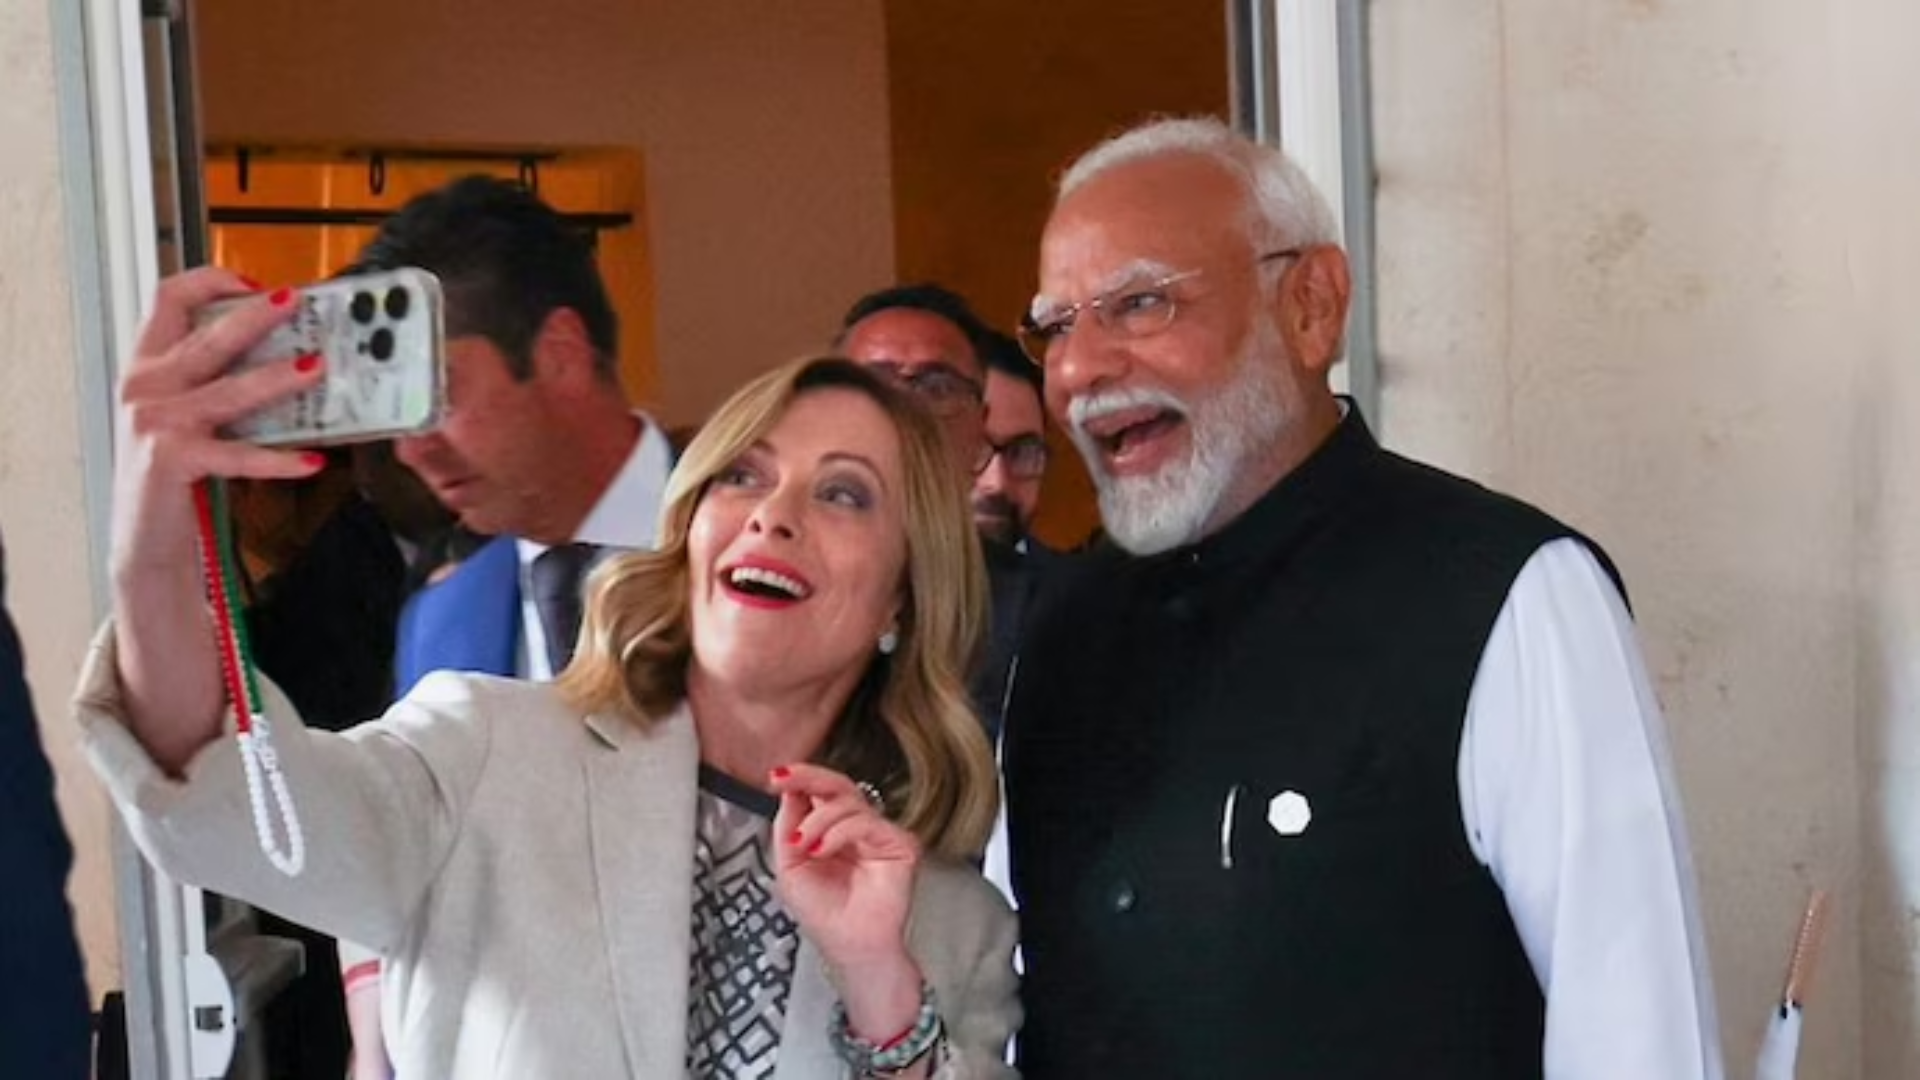 Prime Minister Modi and PM Meloni Pose For A selfie At The End Of G7 Summit Sparking A Fun Banter Over The Social Media